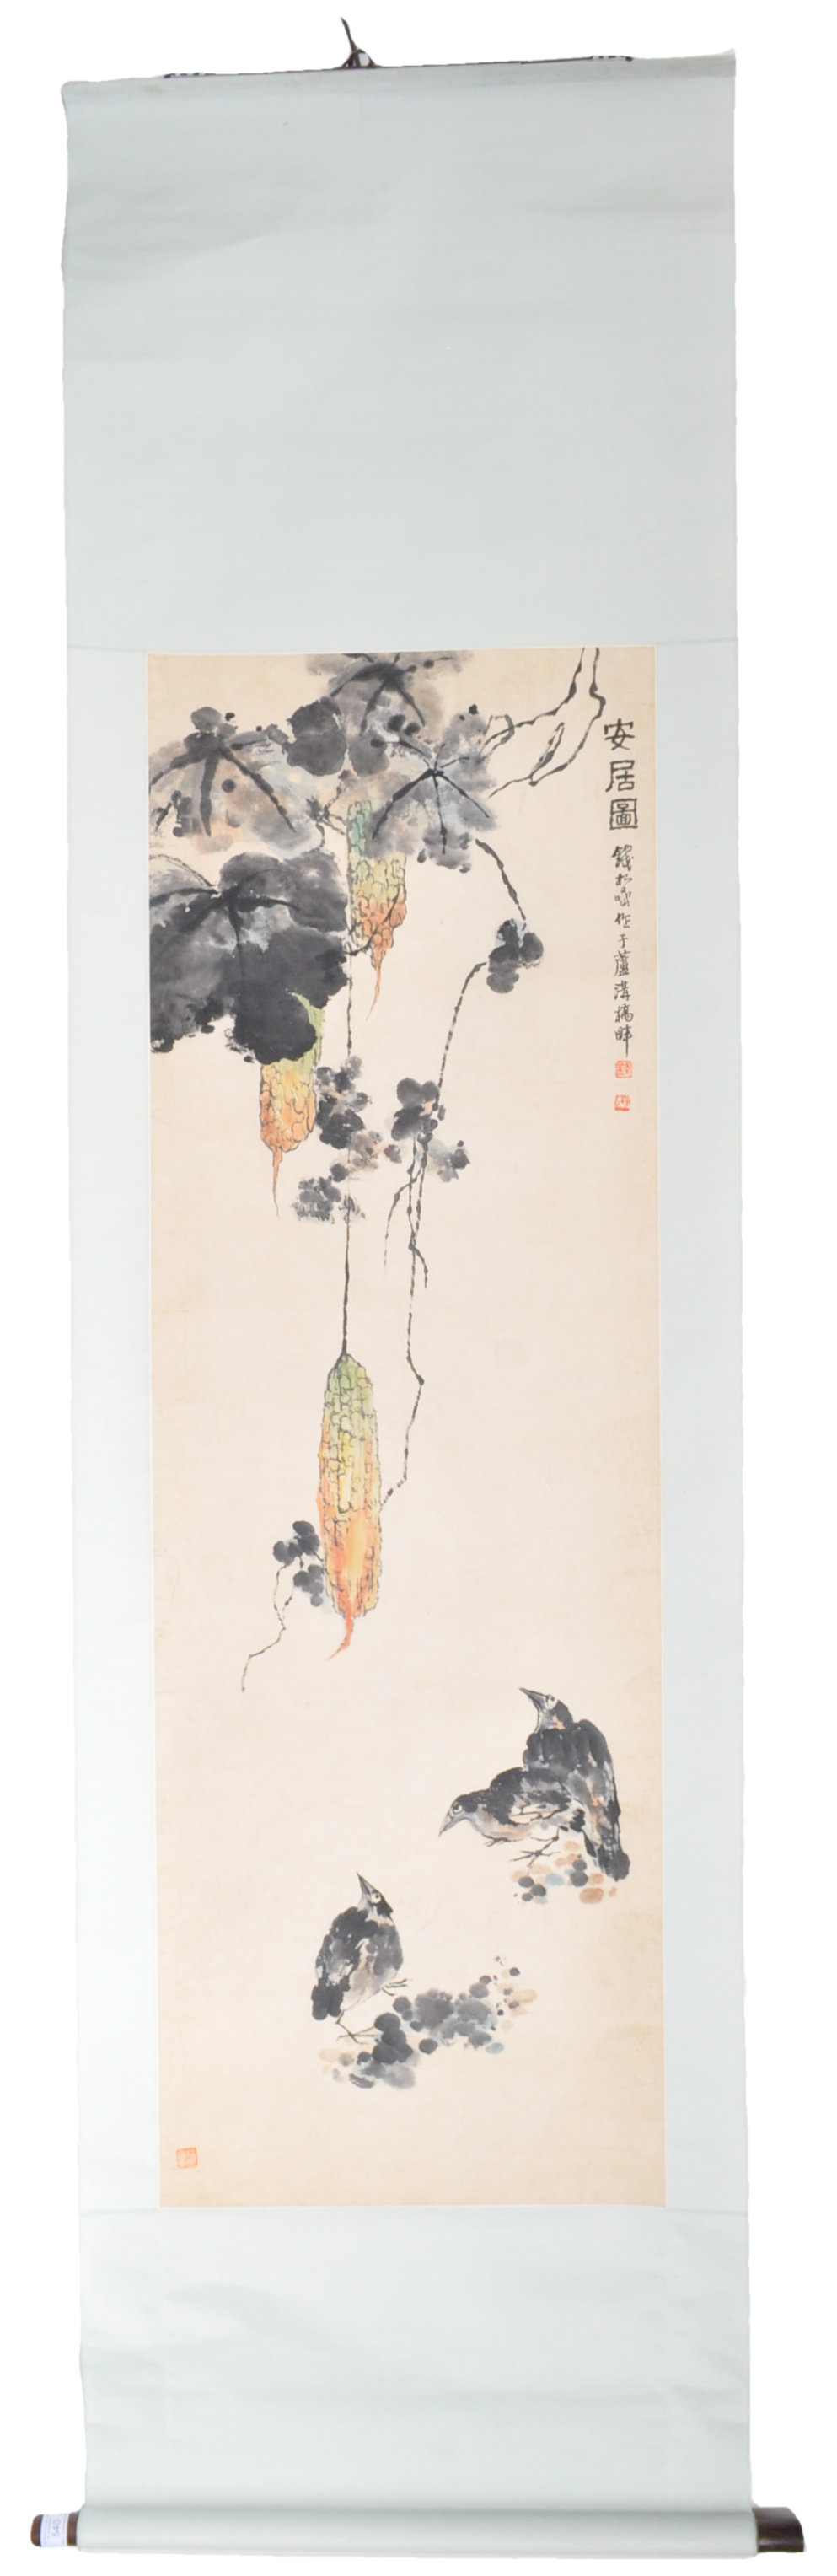 QIAN SONGYAN (1898-1985) - A MOMENT OF PEACEFUL LIFE CHINESE SCROLL